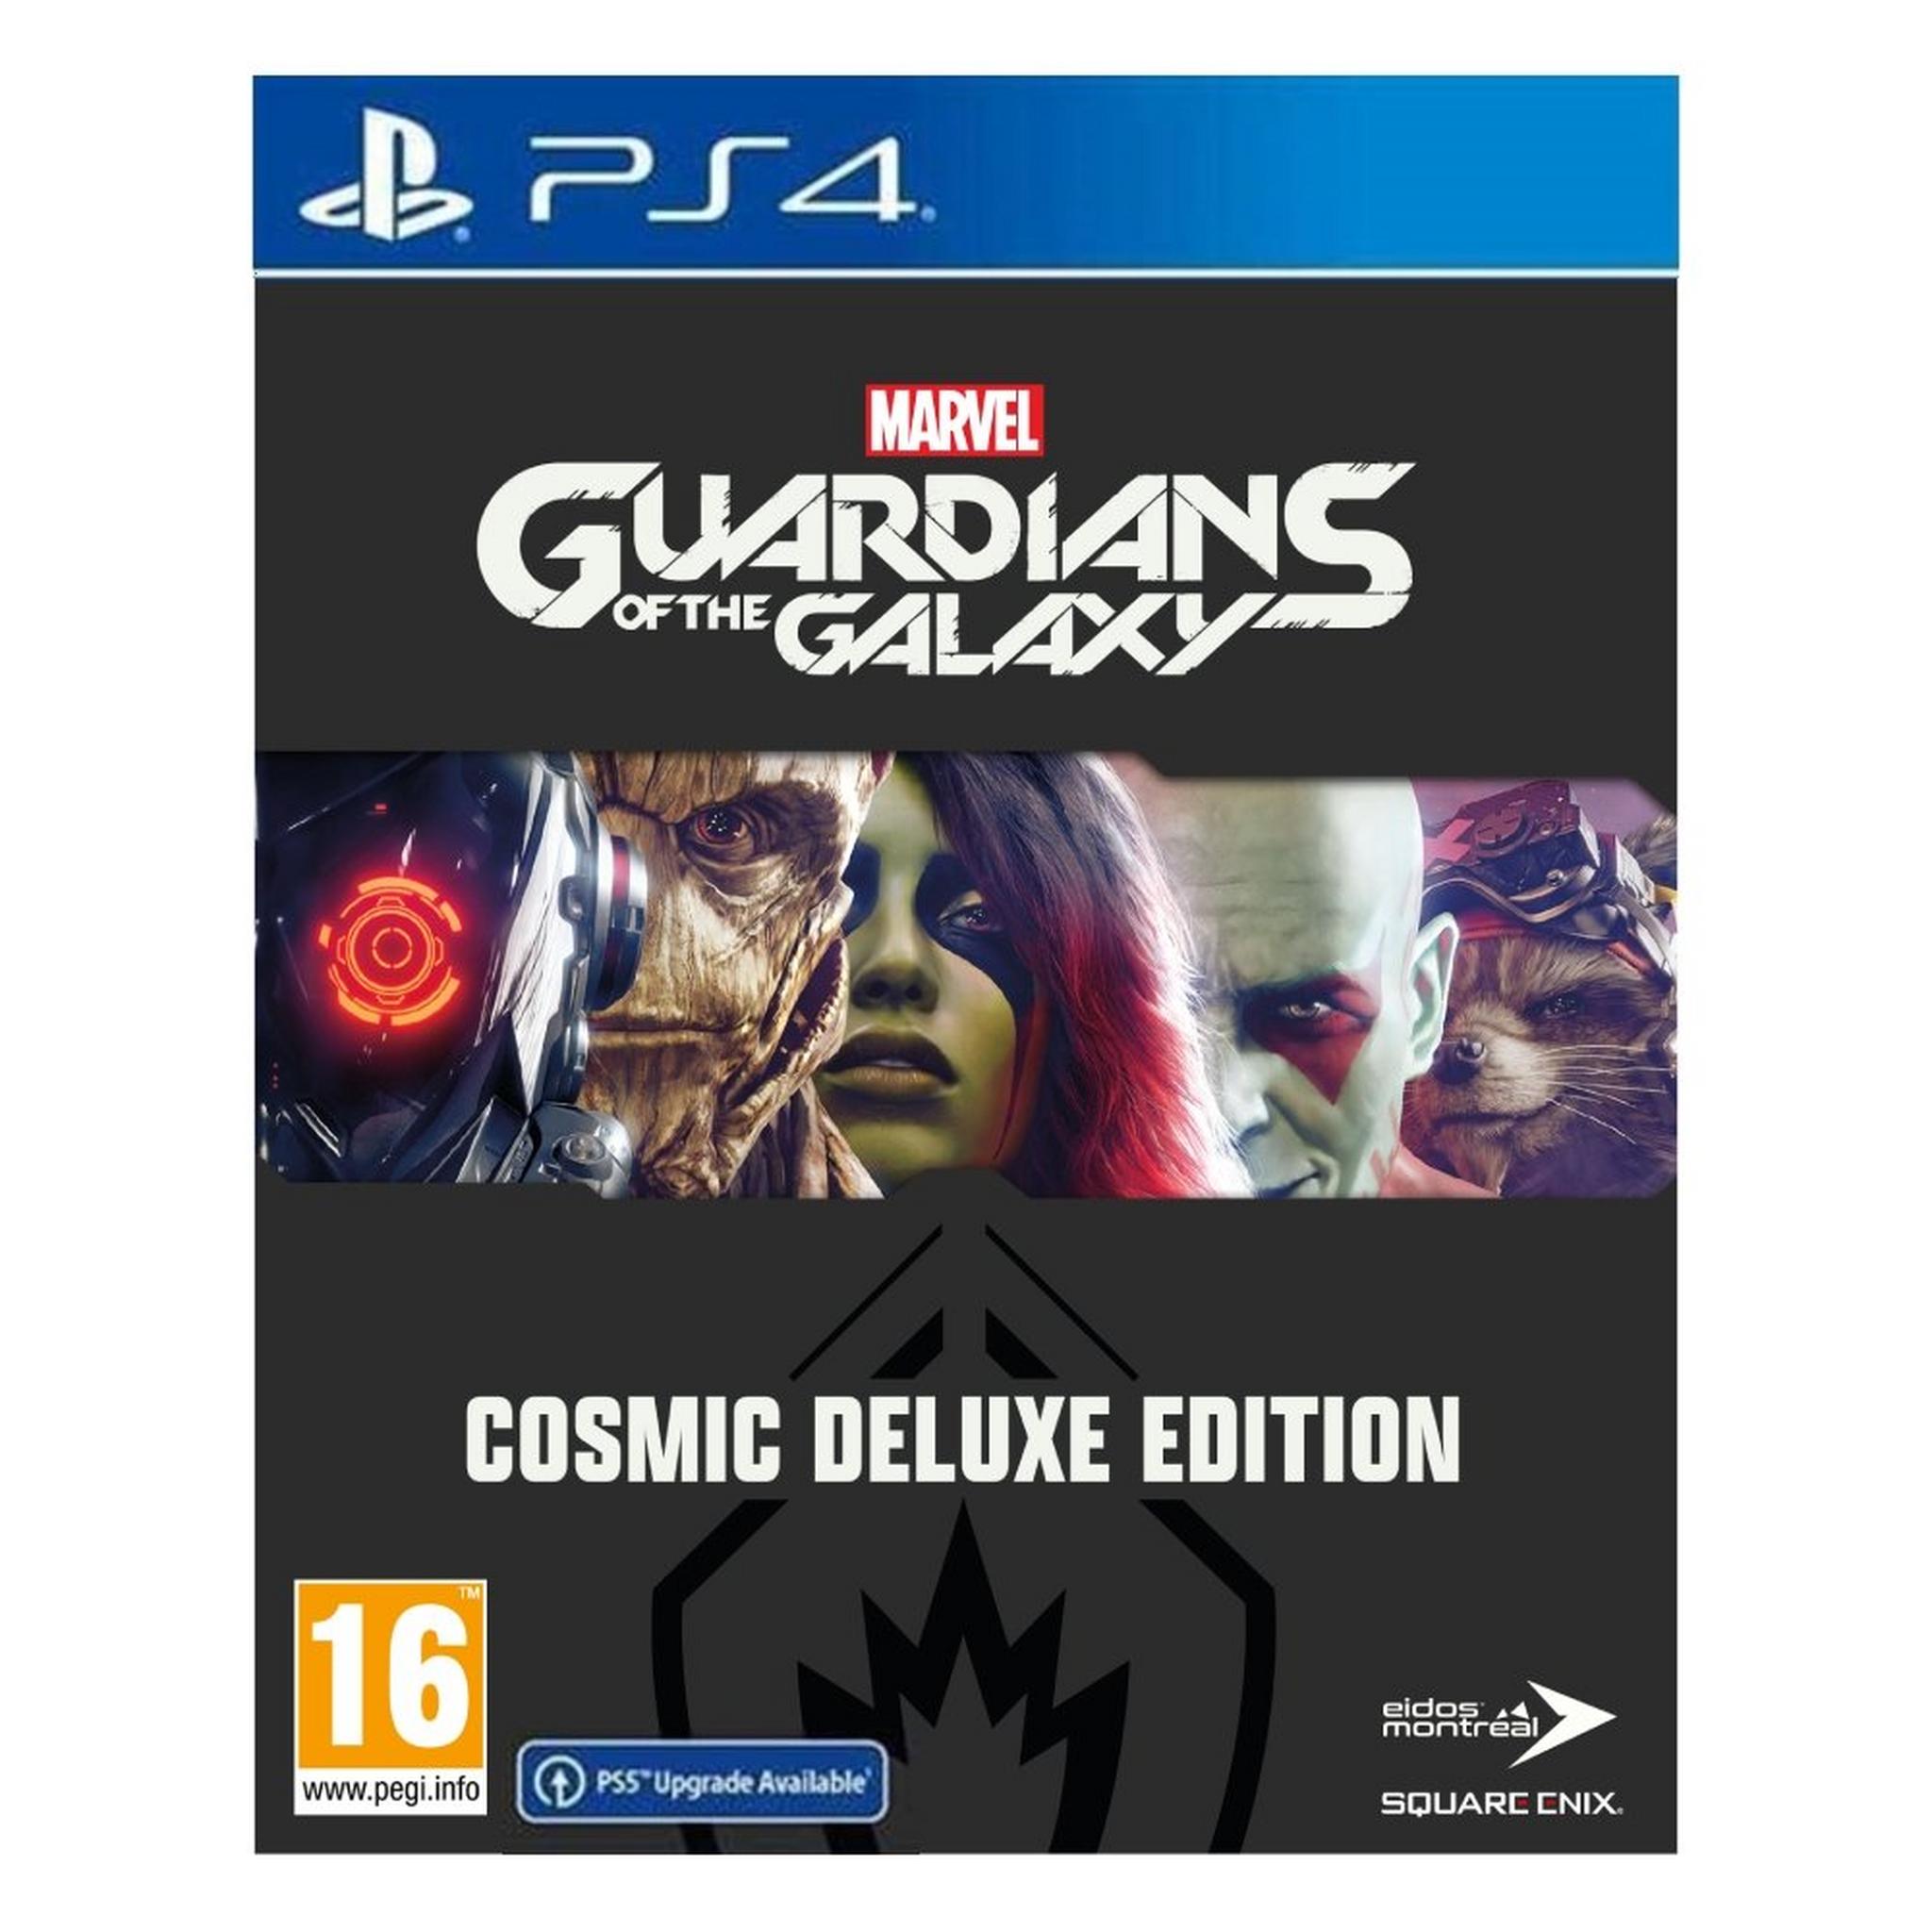 Marvel's Guardians of the Galaxy Cosmic deluxe Edition - Day 1 - PS4 Game